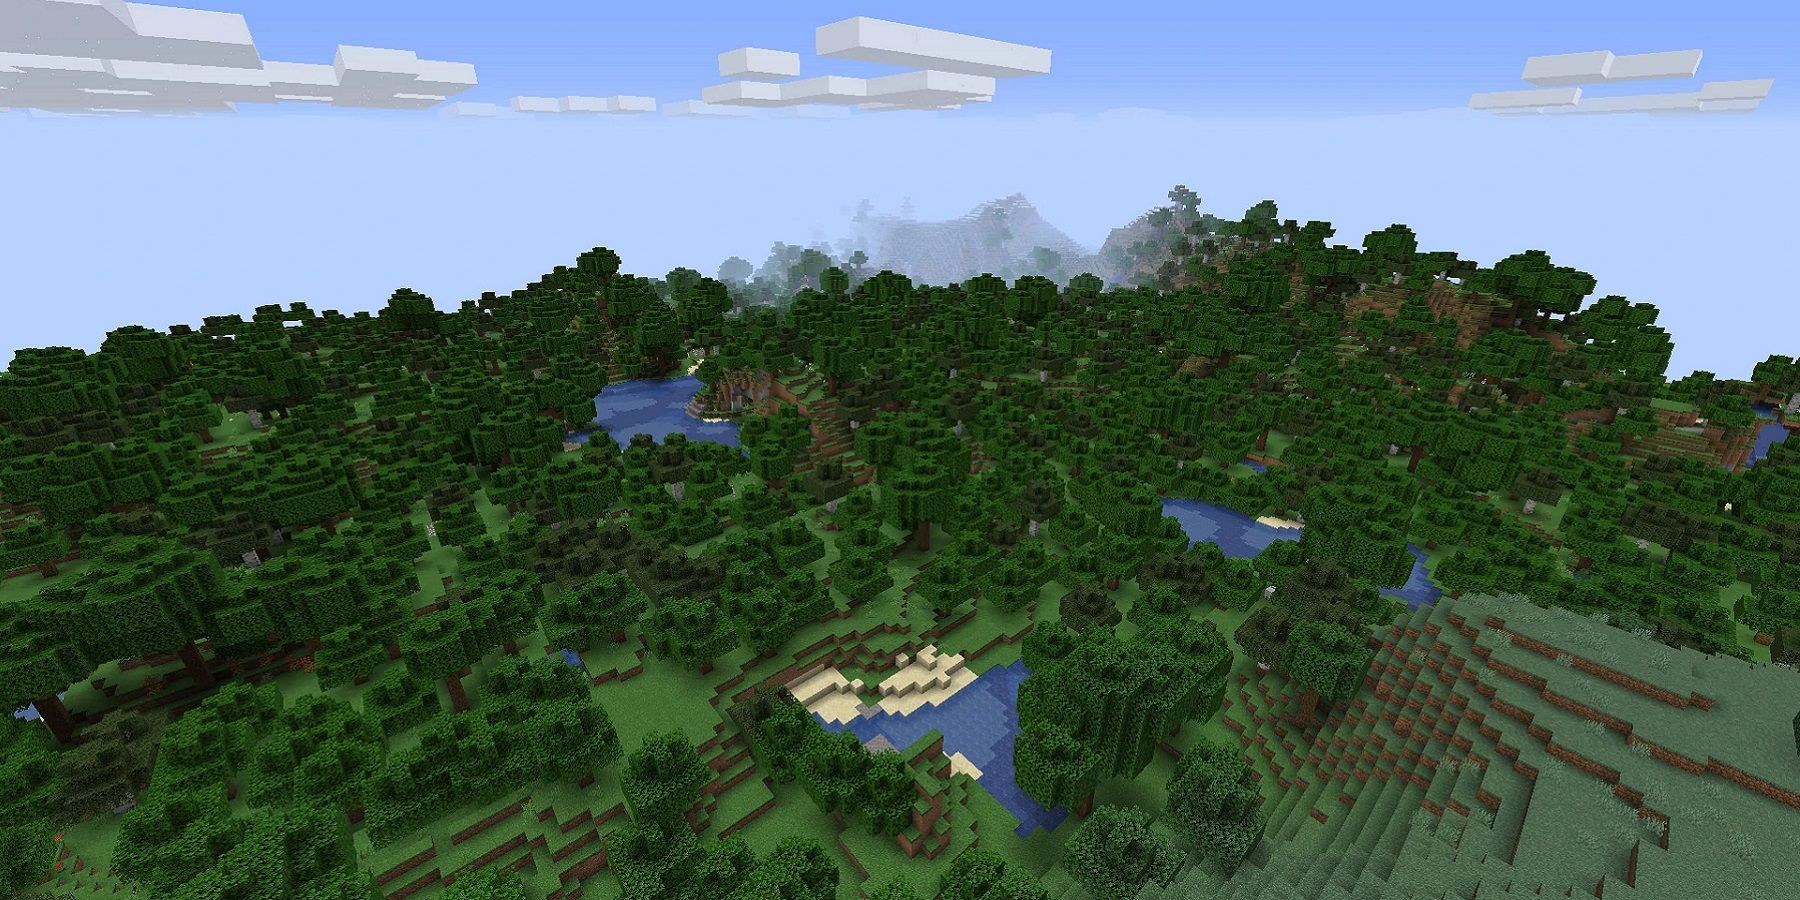 Screenshot from Minecraft showing a bird's eye view of a forested area.